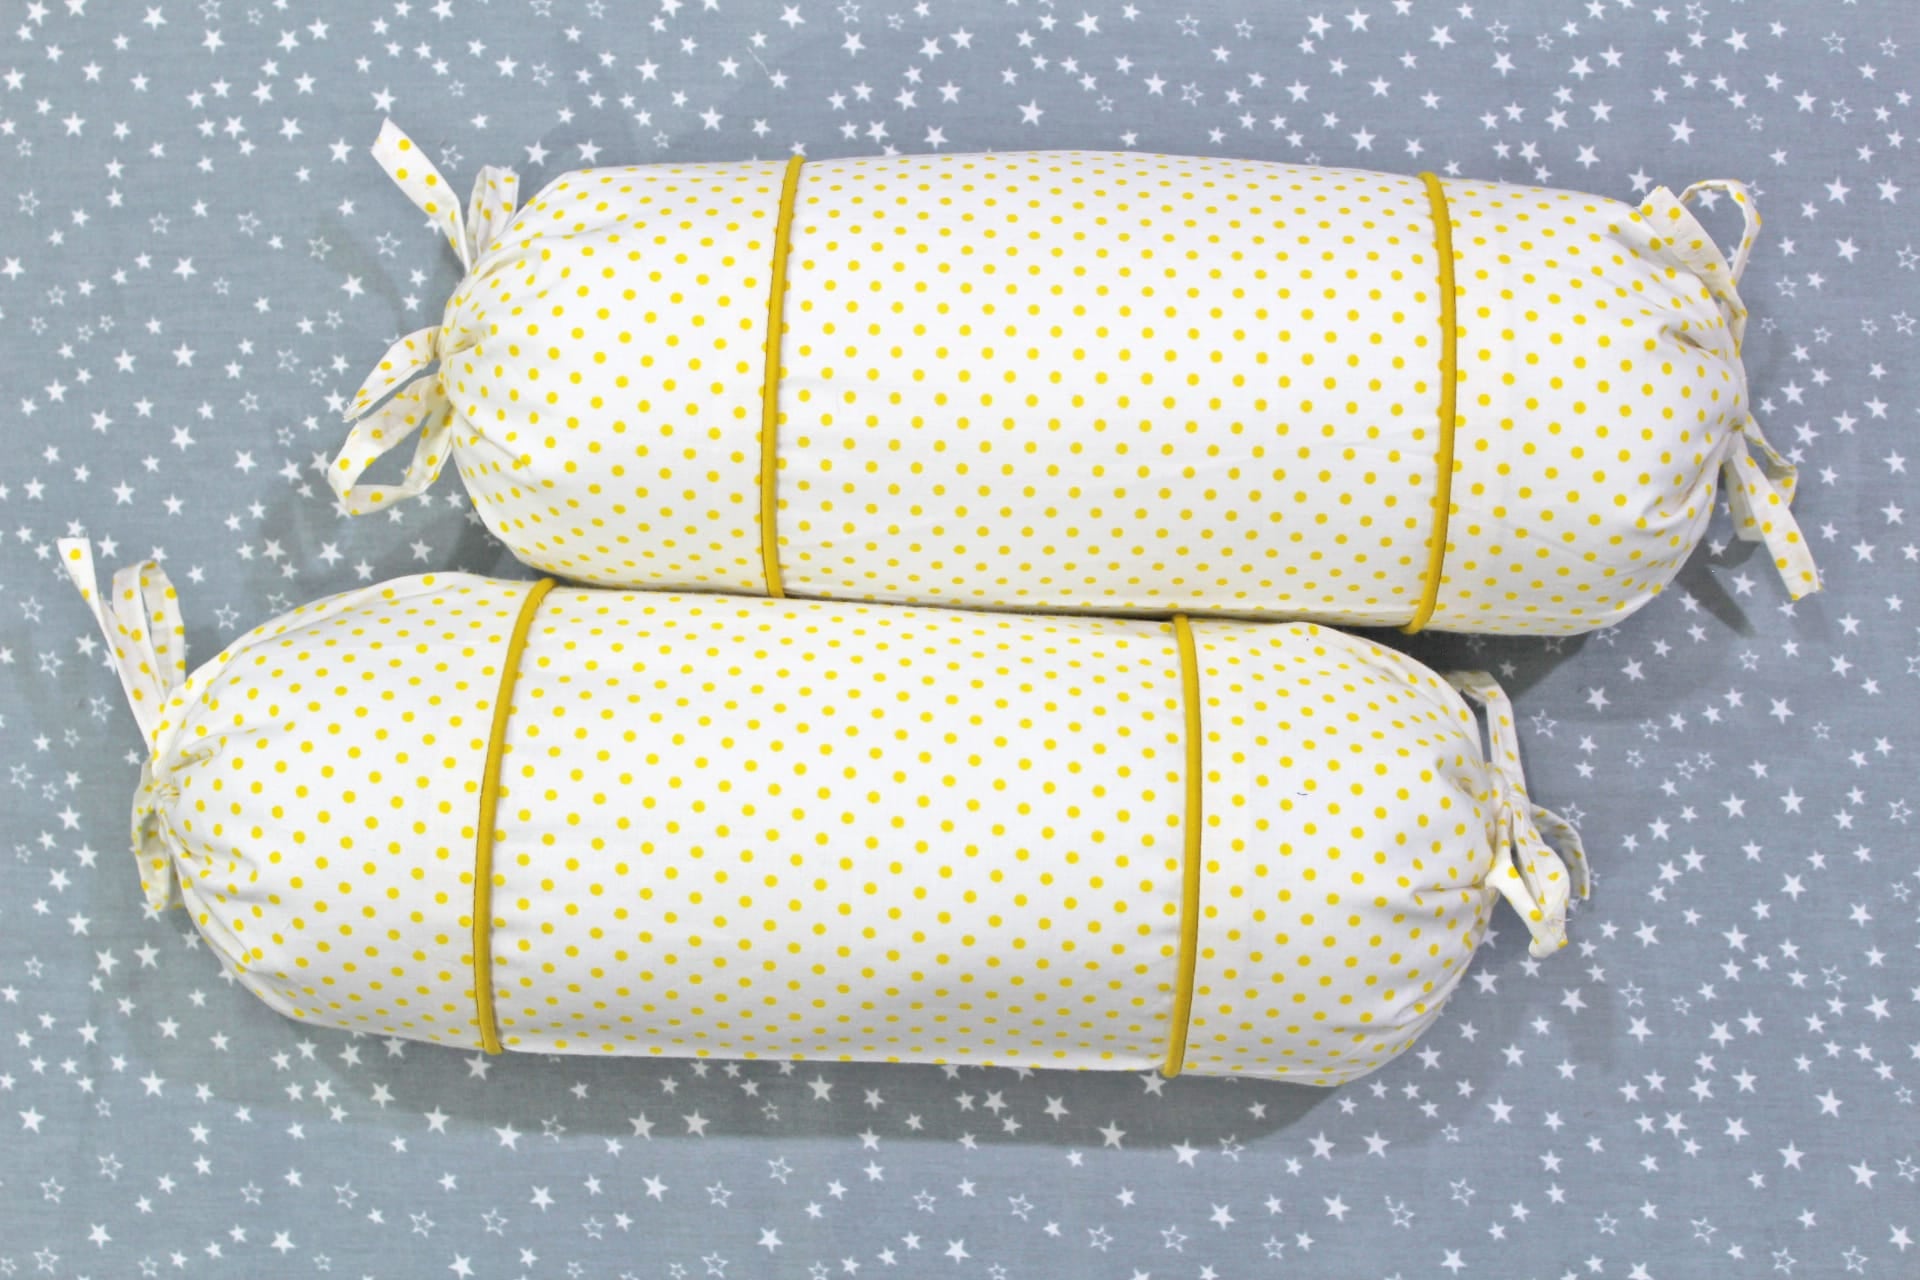 MELANGE 100% Cotton Baby Bolster Cover (with Bolster Insert), Yellow